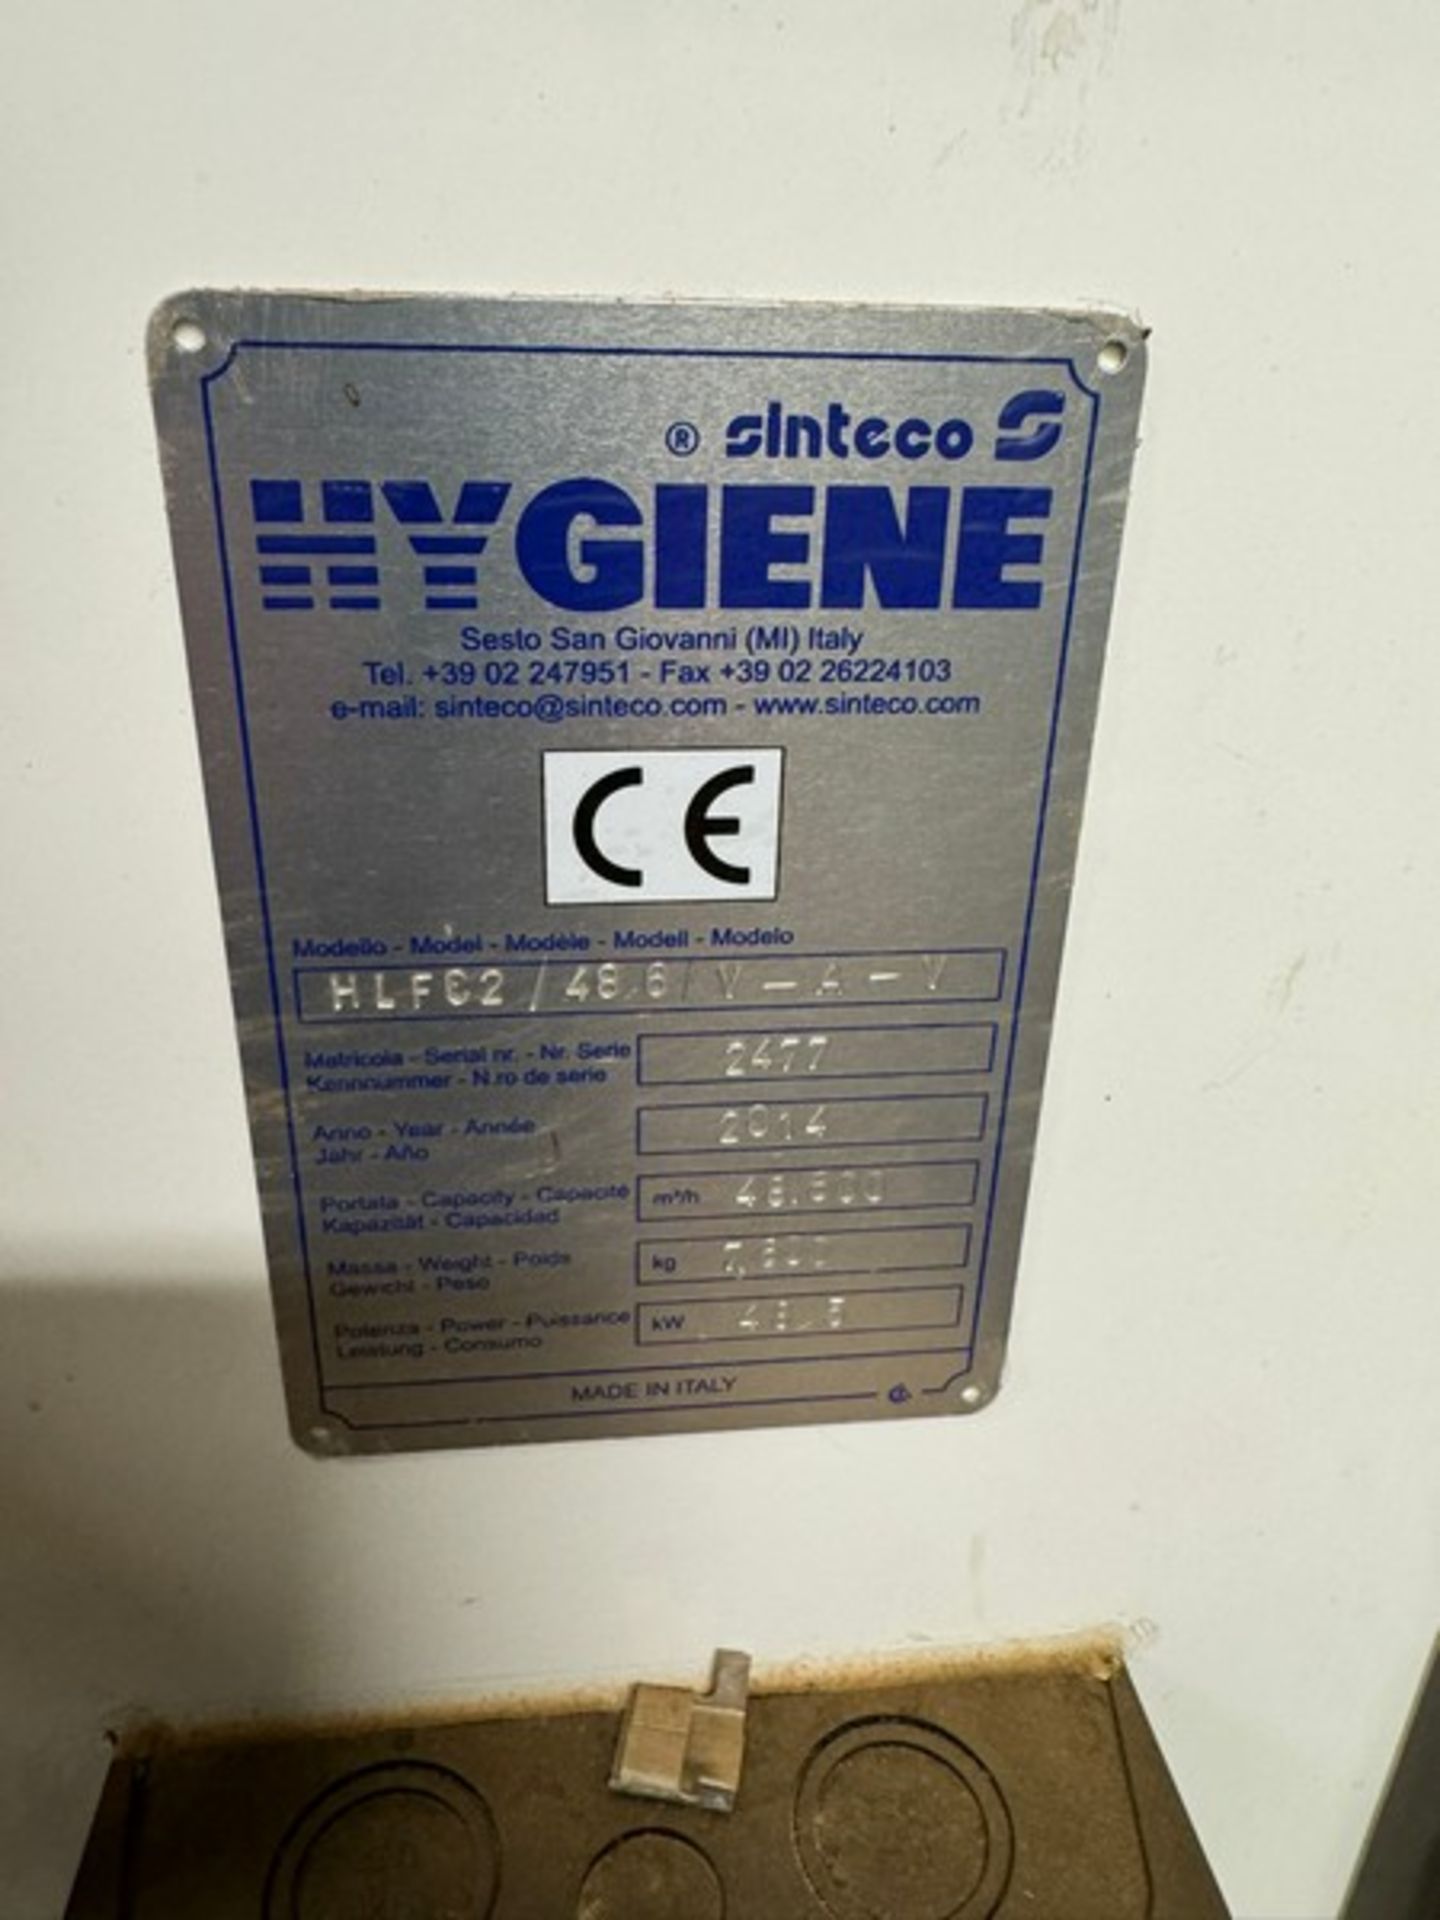 Sinteco Hygiene Air Cleaner, with 3-Door Control Panel (LOCATED IN FREEHOLD, N.J.) - Image 6 of 12